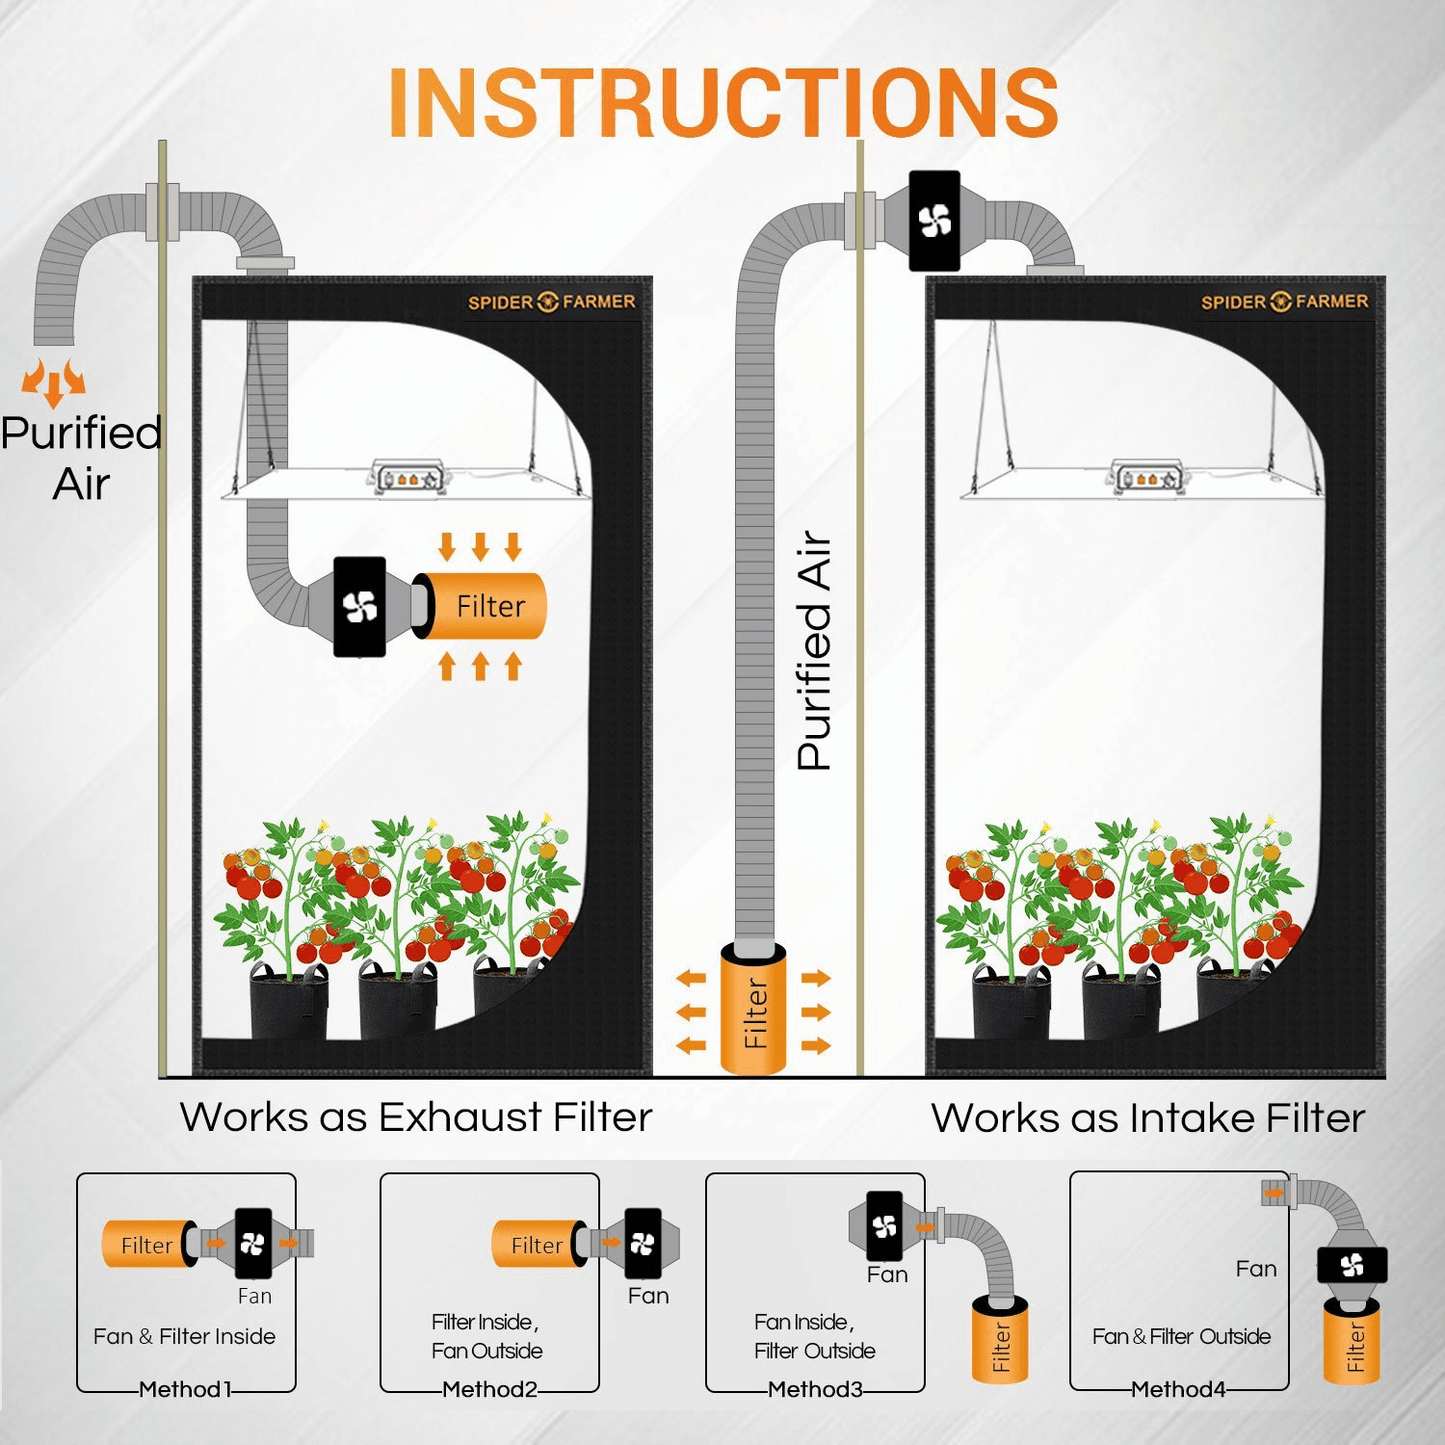 Spider Farmer SF1000D LED Grow Light + 2' x 2' Grow Tent + Inline Fan Combo with Speed Controller SPIDER-SF-1000-D-SET Kits 6973280372546